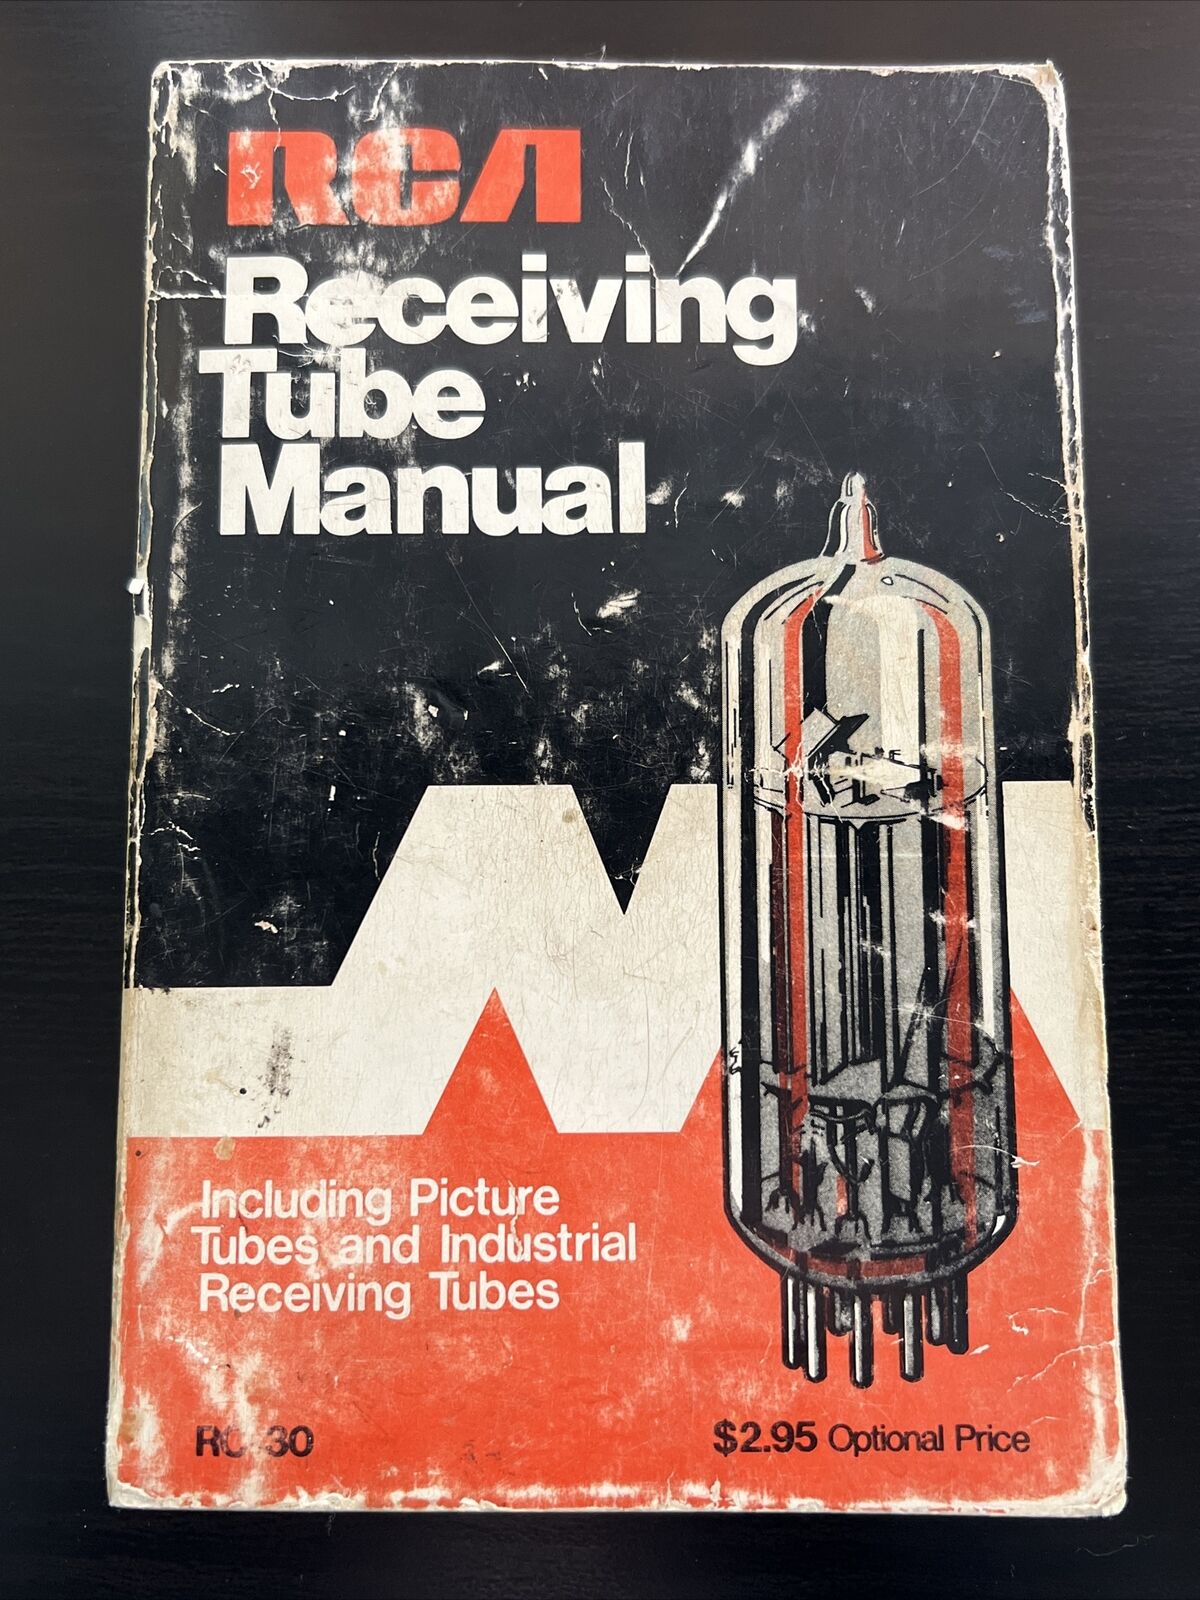 RCA Technical Manual Fits Receiving Tube Technical Series RC-30 - 1975